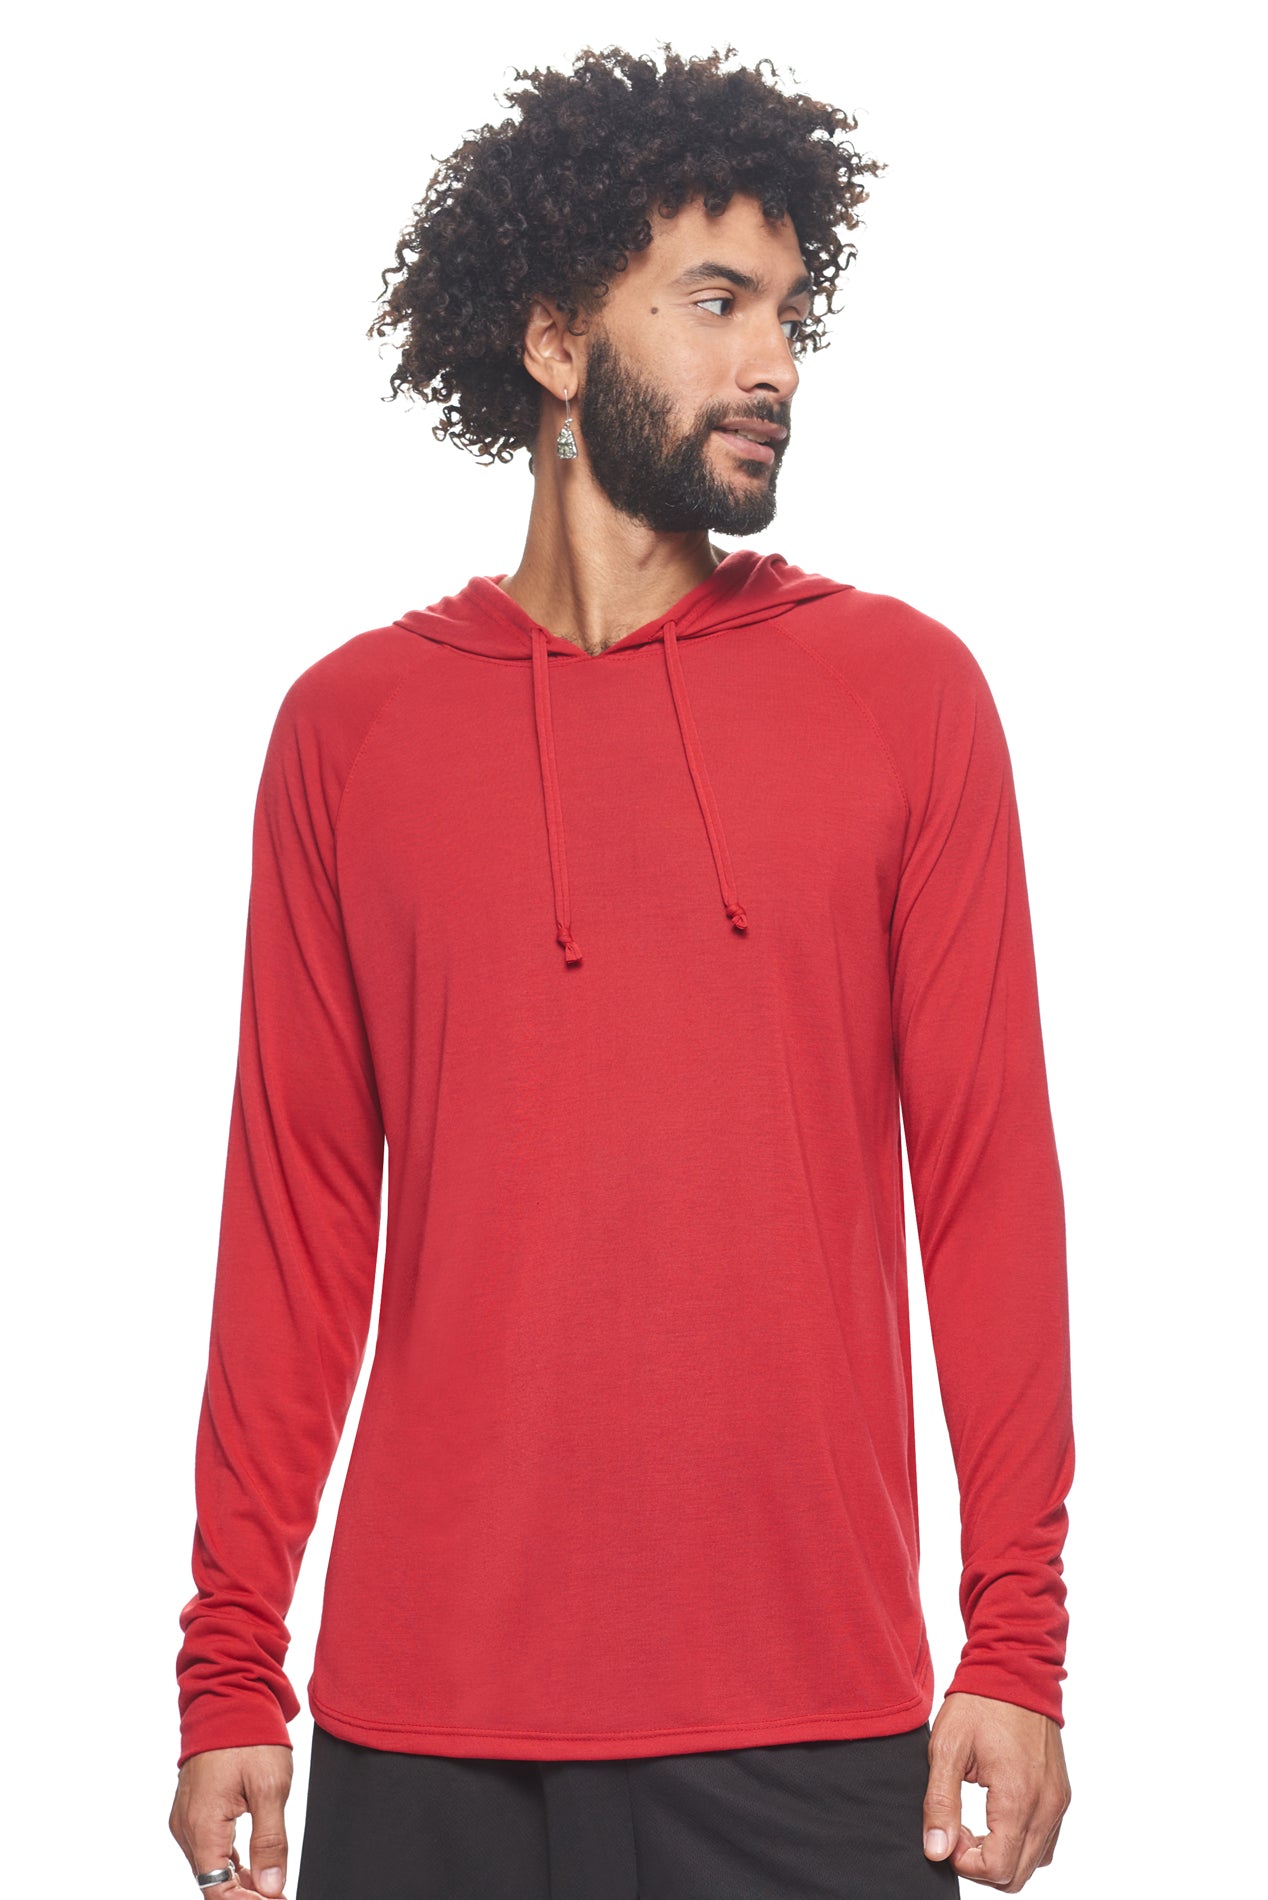 Expert Brand Wholesale Super Soft Eco-Friendly Performance Apparel Fashion Sportswear Men's Hoodie Shirt Long Sleeve Made in USA scarlet#scarlet